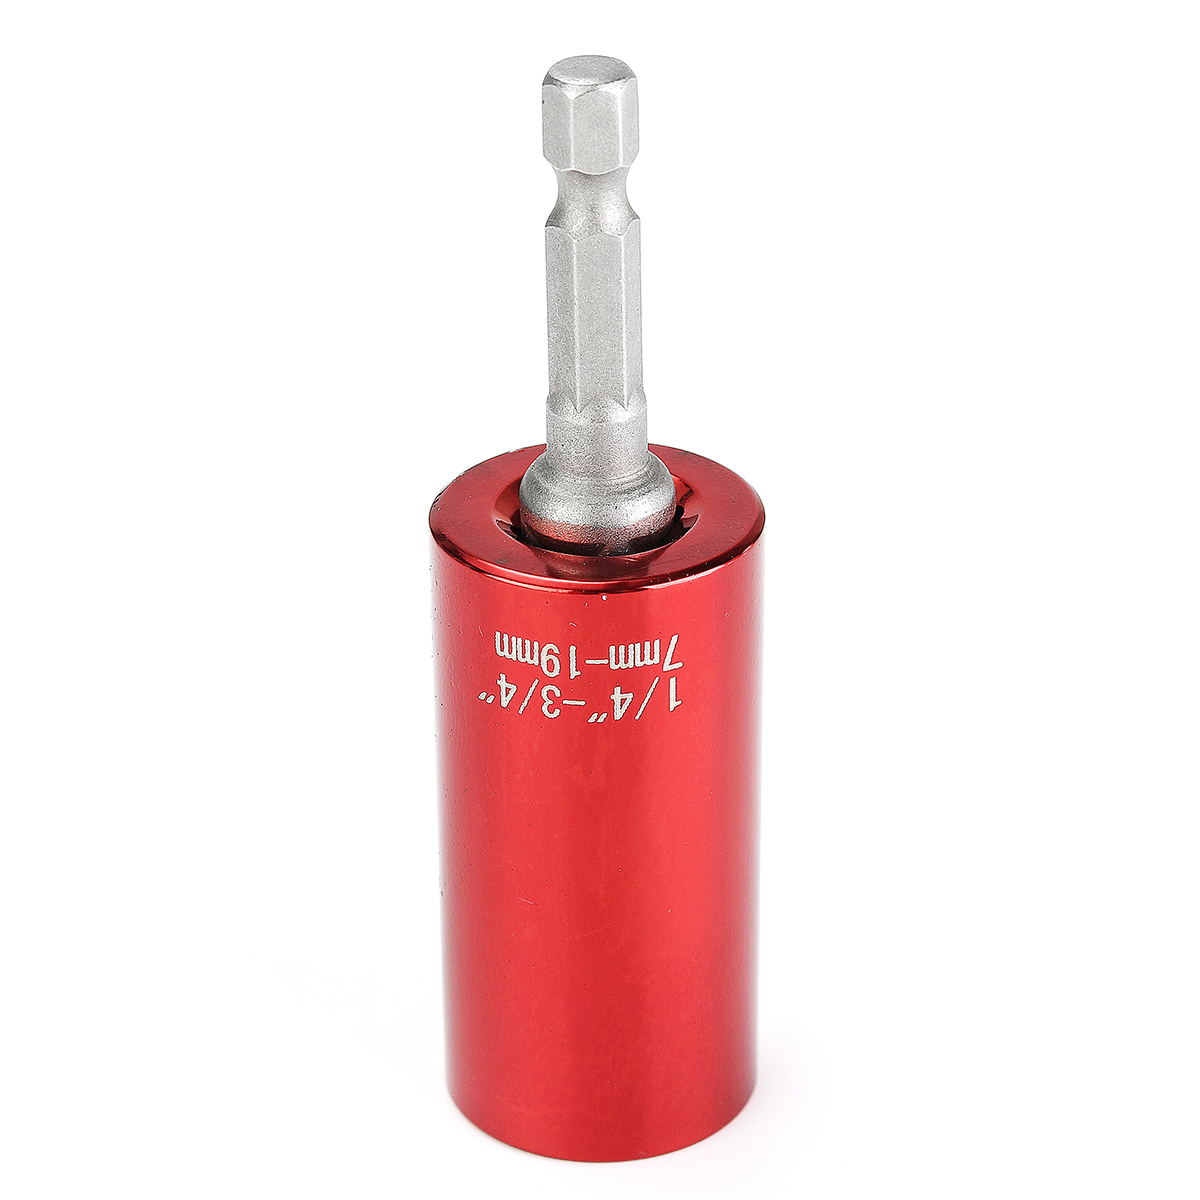 7-19MM-Universal-Socket-Adapter-Wrench-Sleeve-with-Power-Drill-Adapter-Tool-1187115-7